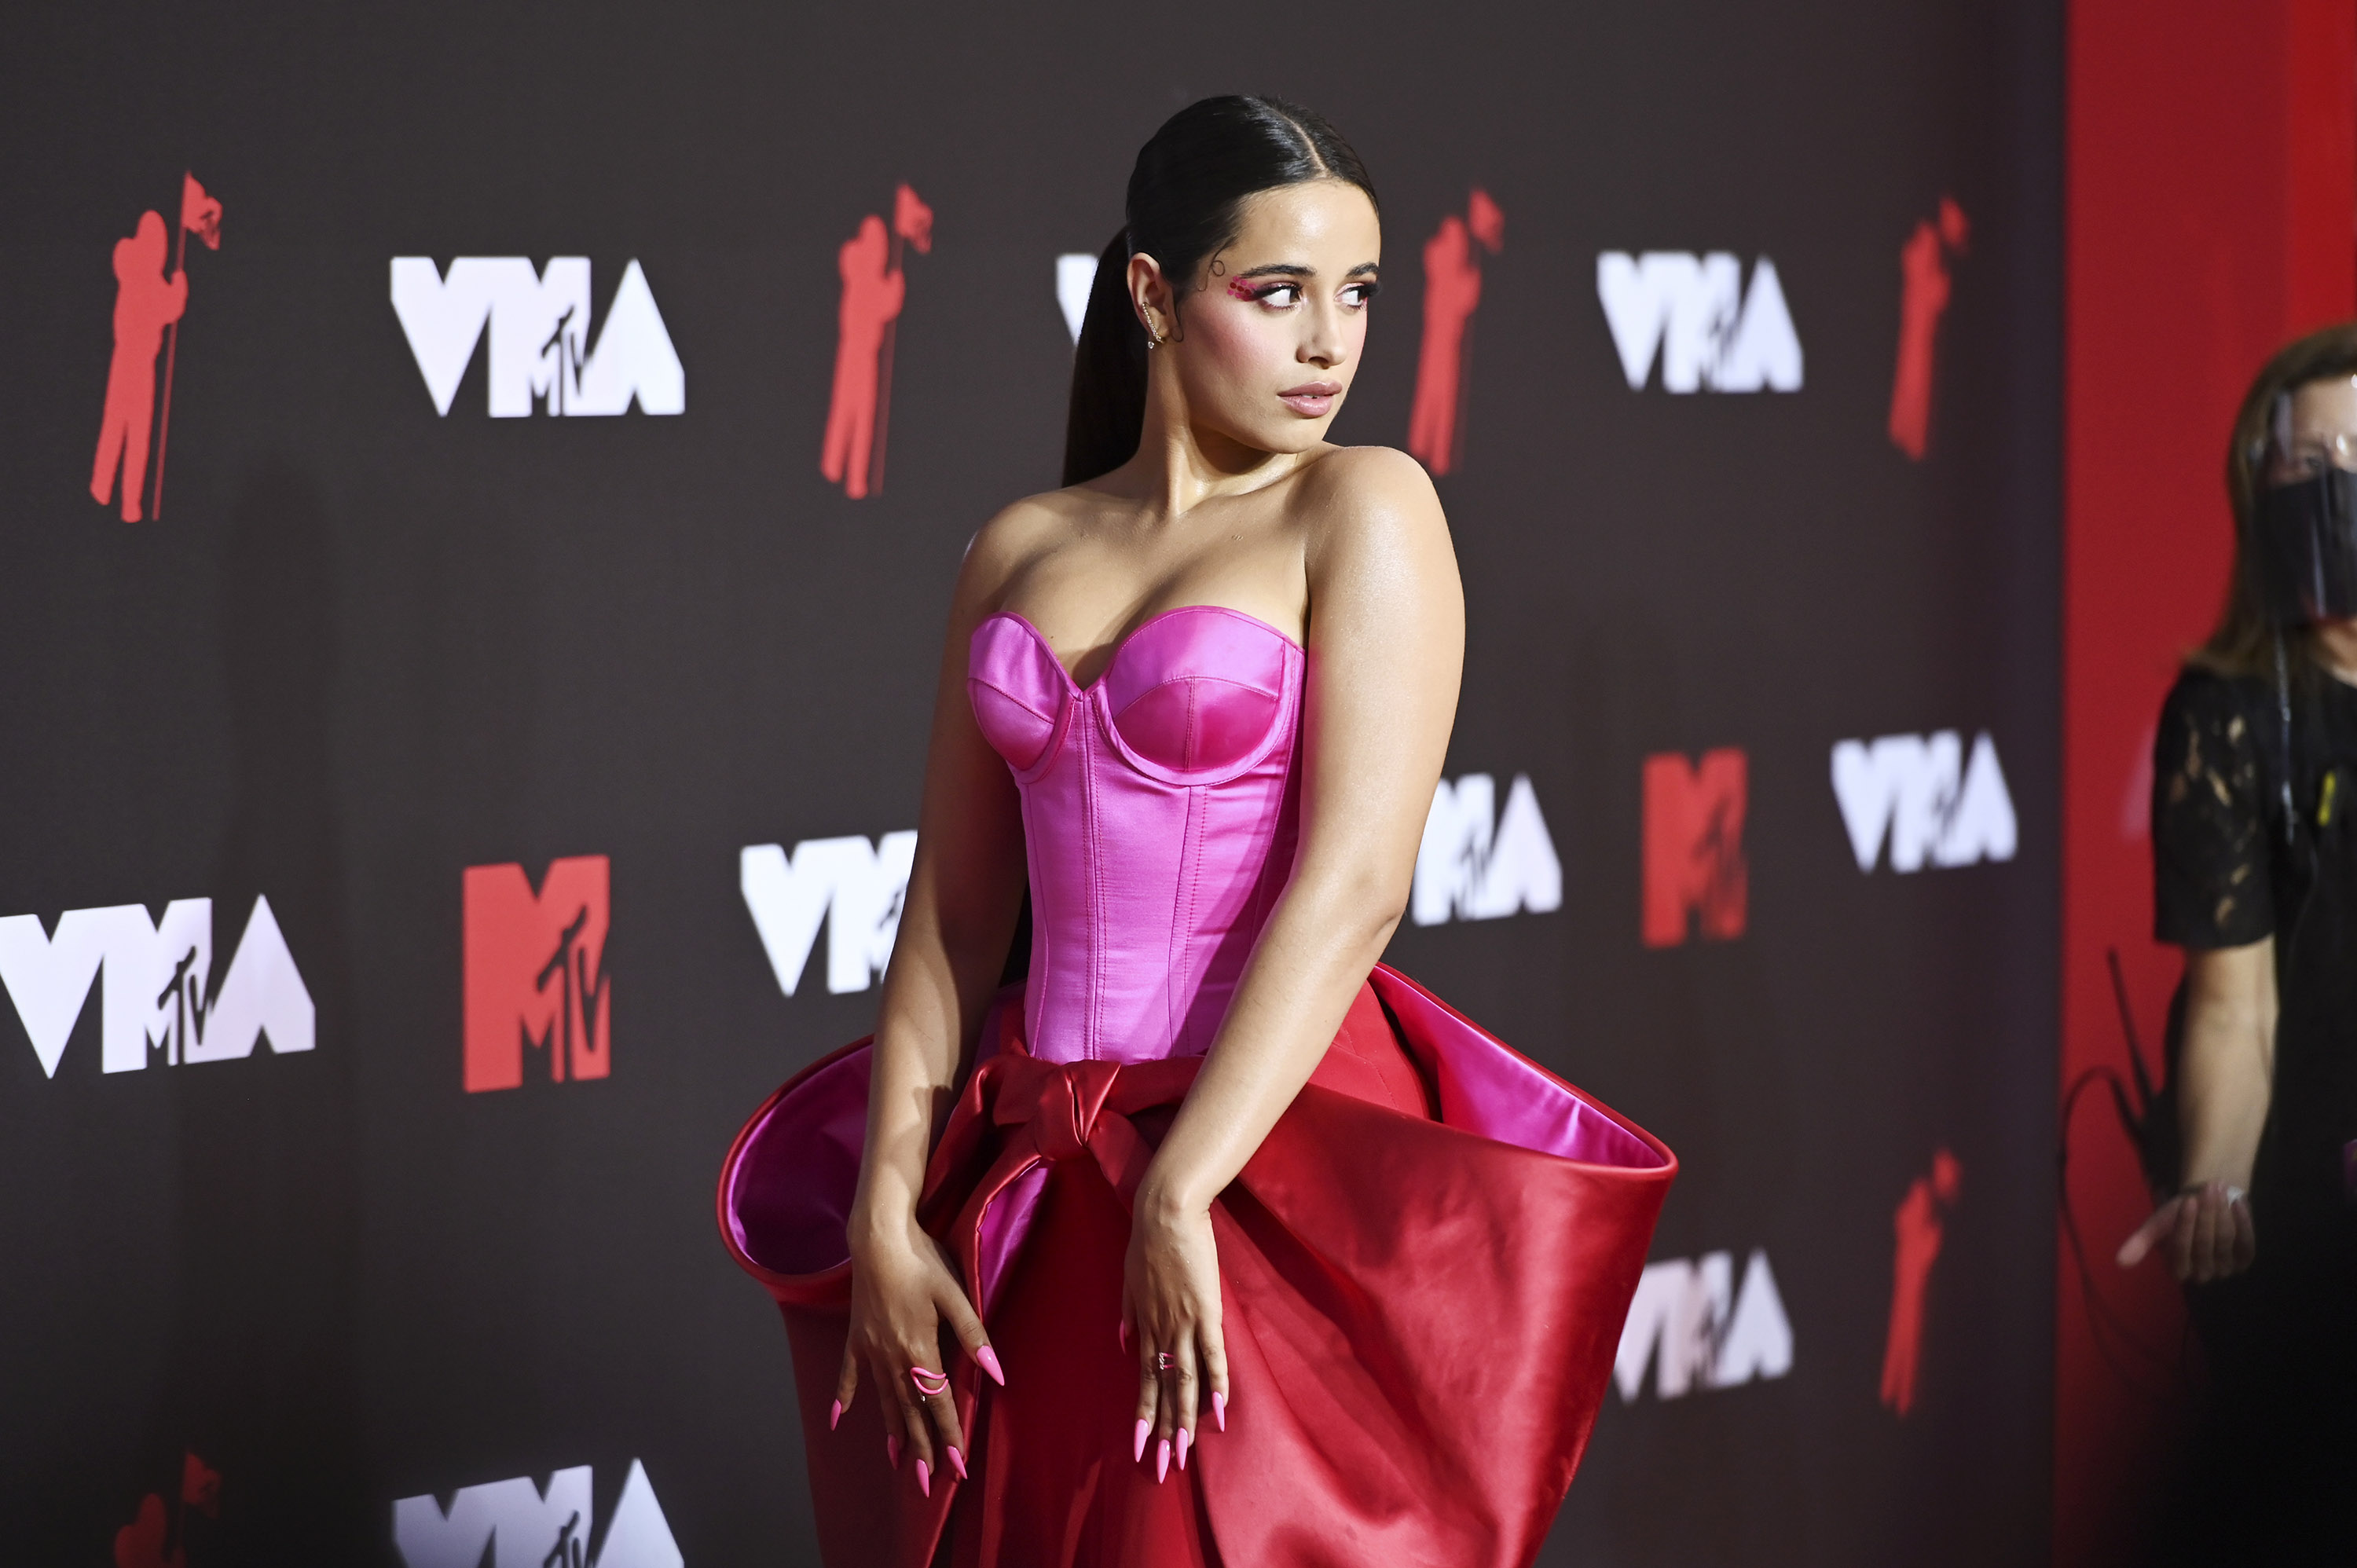 Camila Cabello attends the 2021 MTV Video Music Awards at Barclays Center on Sept. 12, 2021, in the Brooklyn borough of New York City.